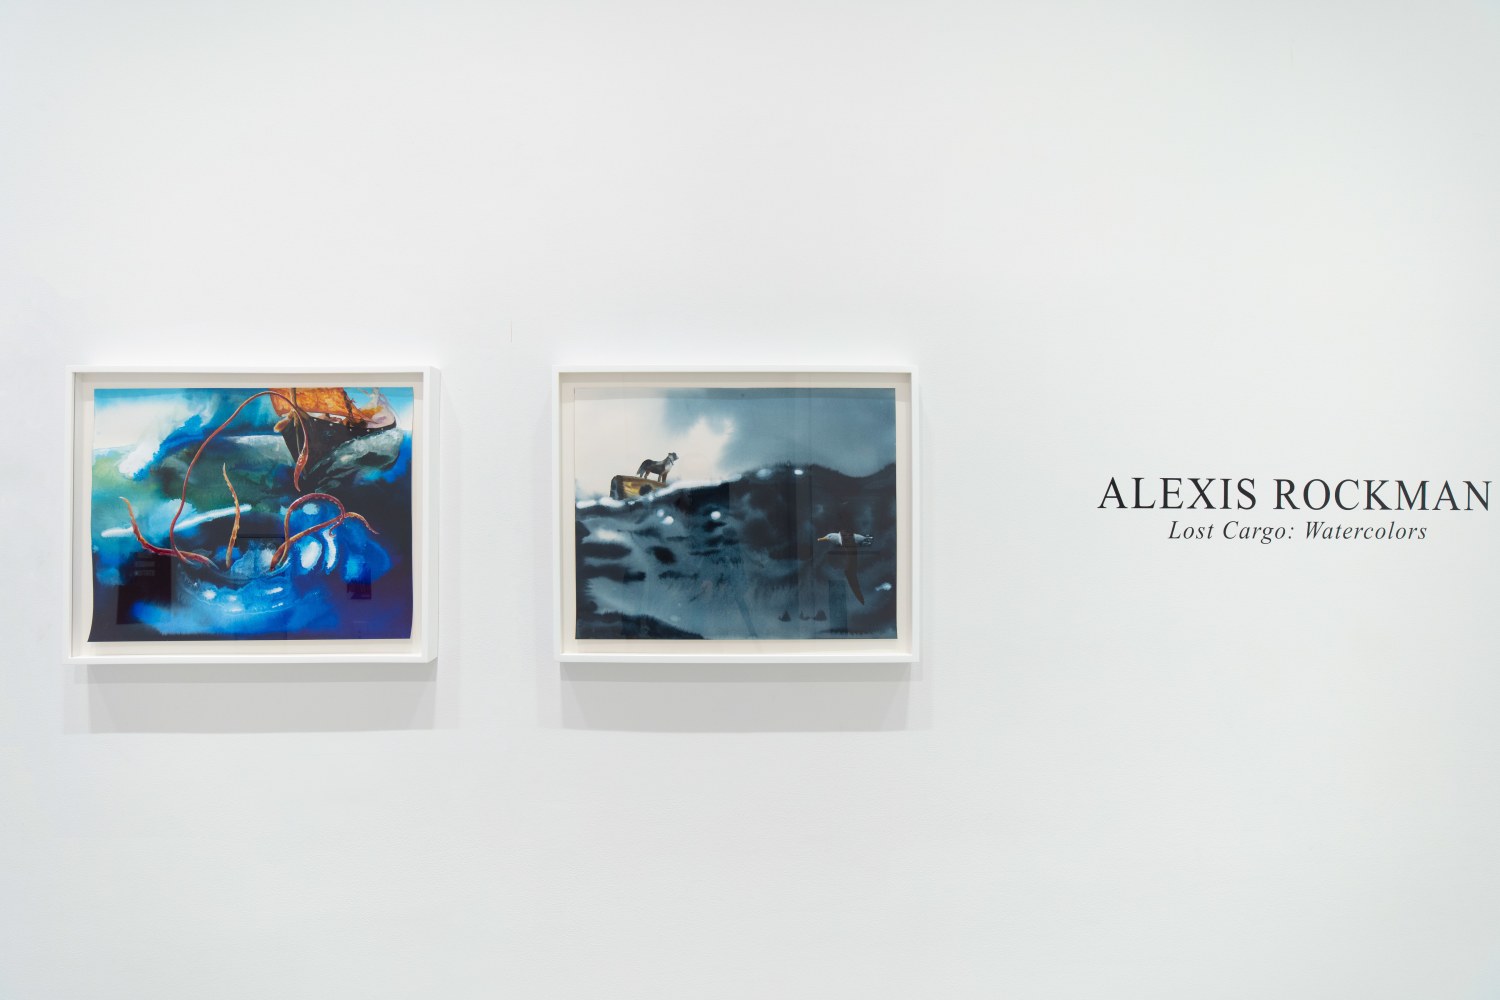 gallery installation view with framed watercolors on paper